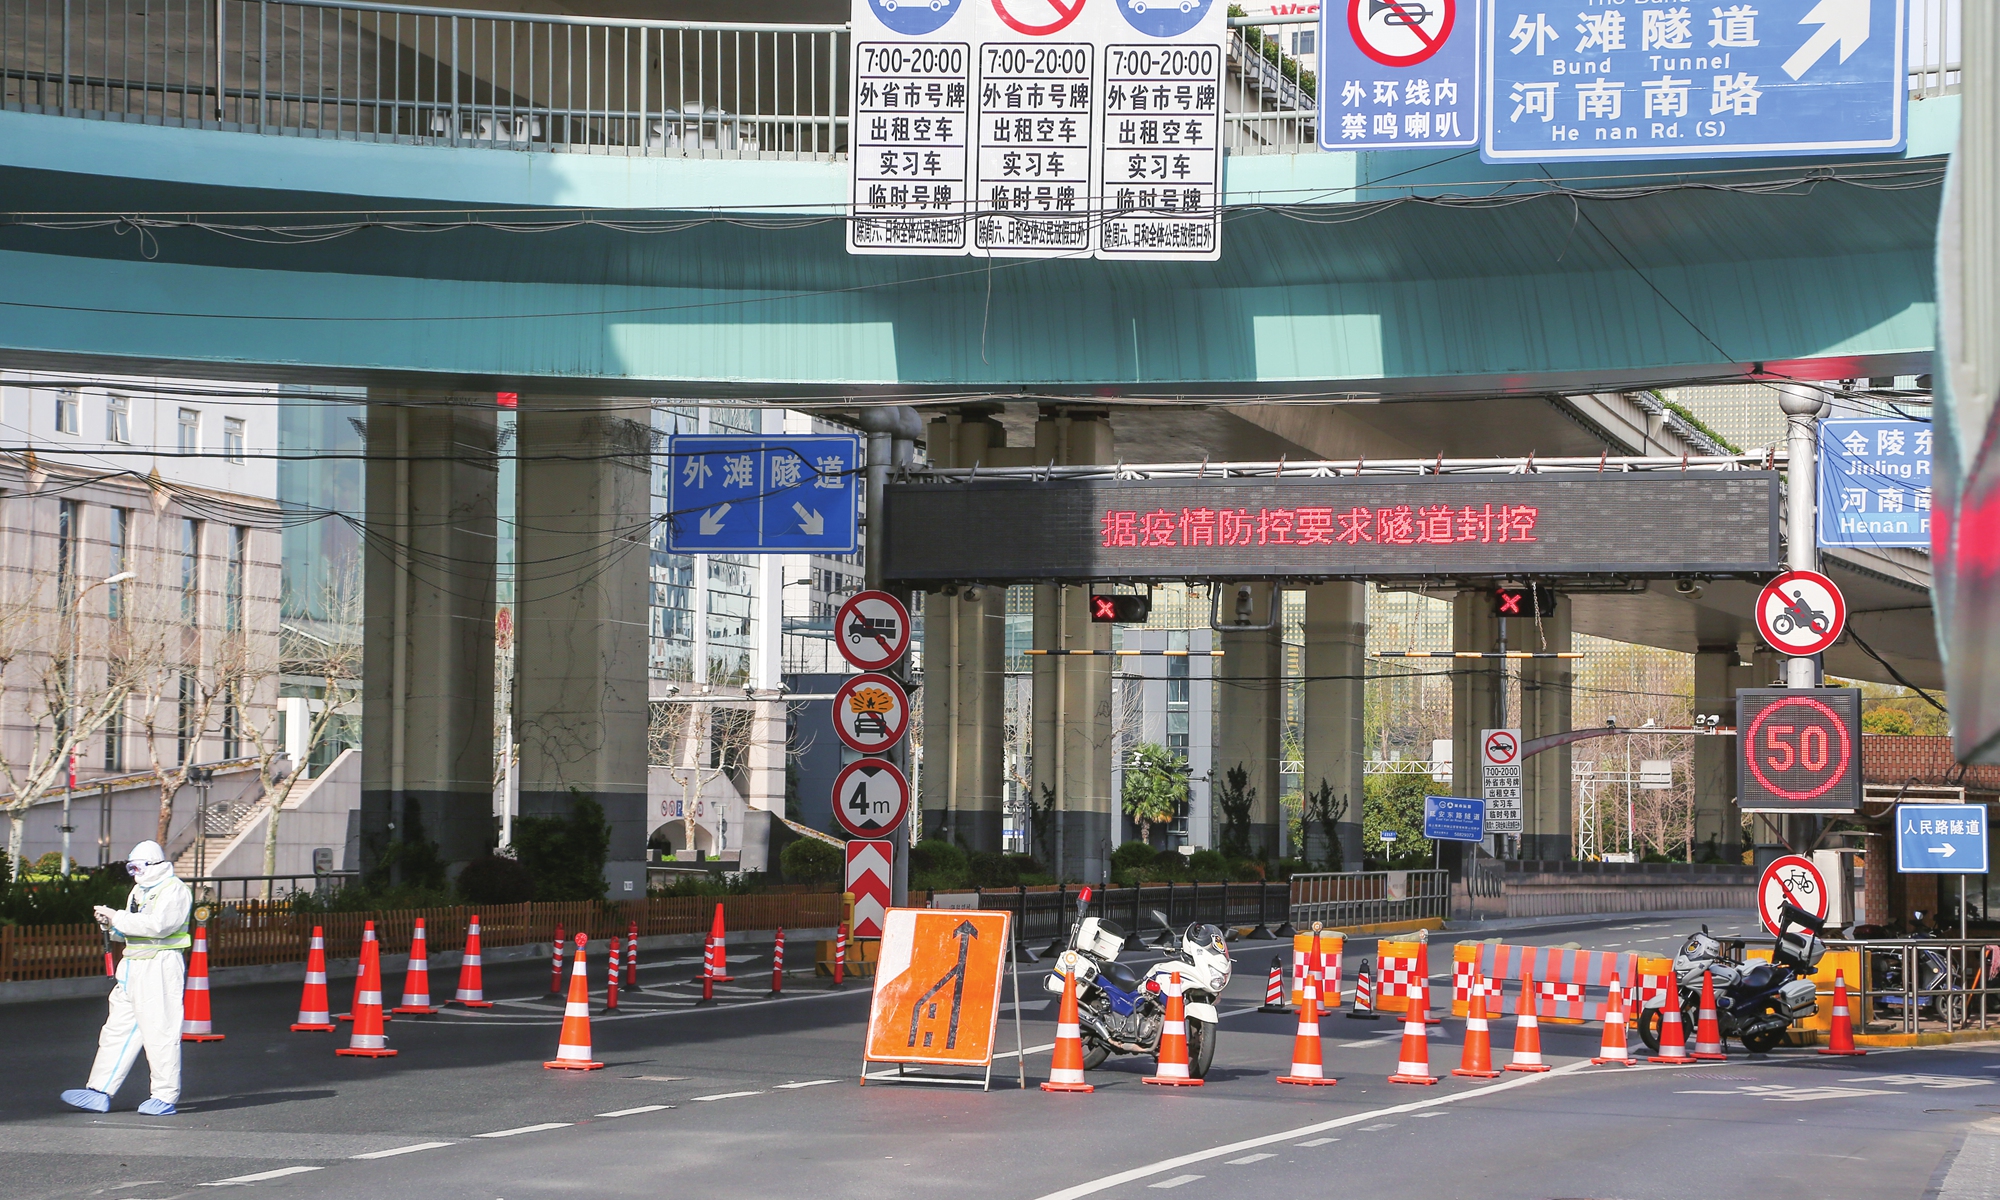 The tunnel connecting Pudong with Puxi is sealed off, with only a few cars with a pass allowed. Photo: Wu Chuanhua/Global Times